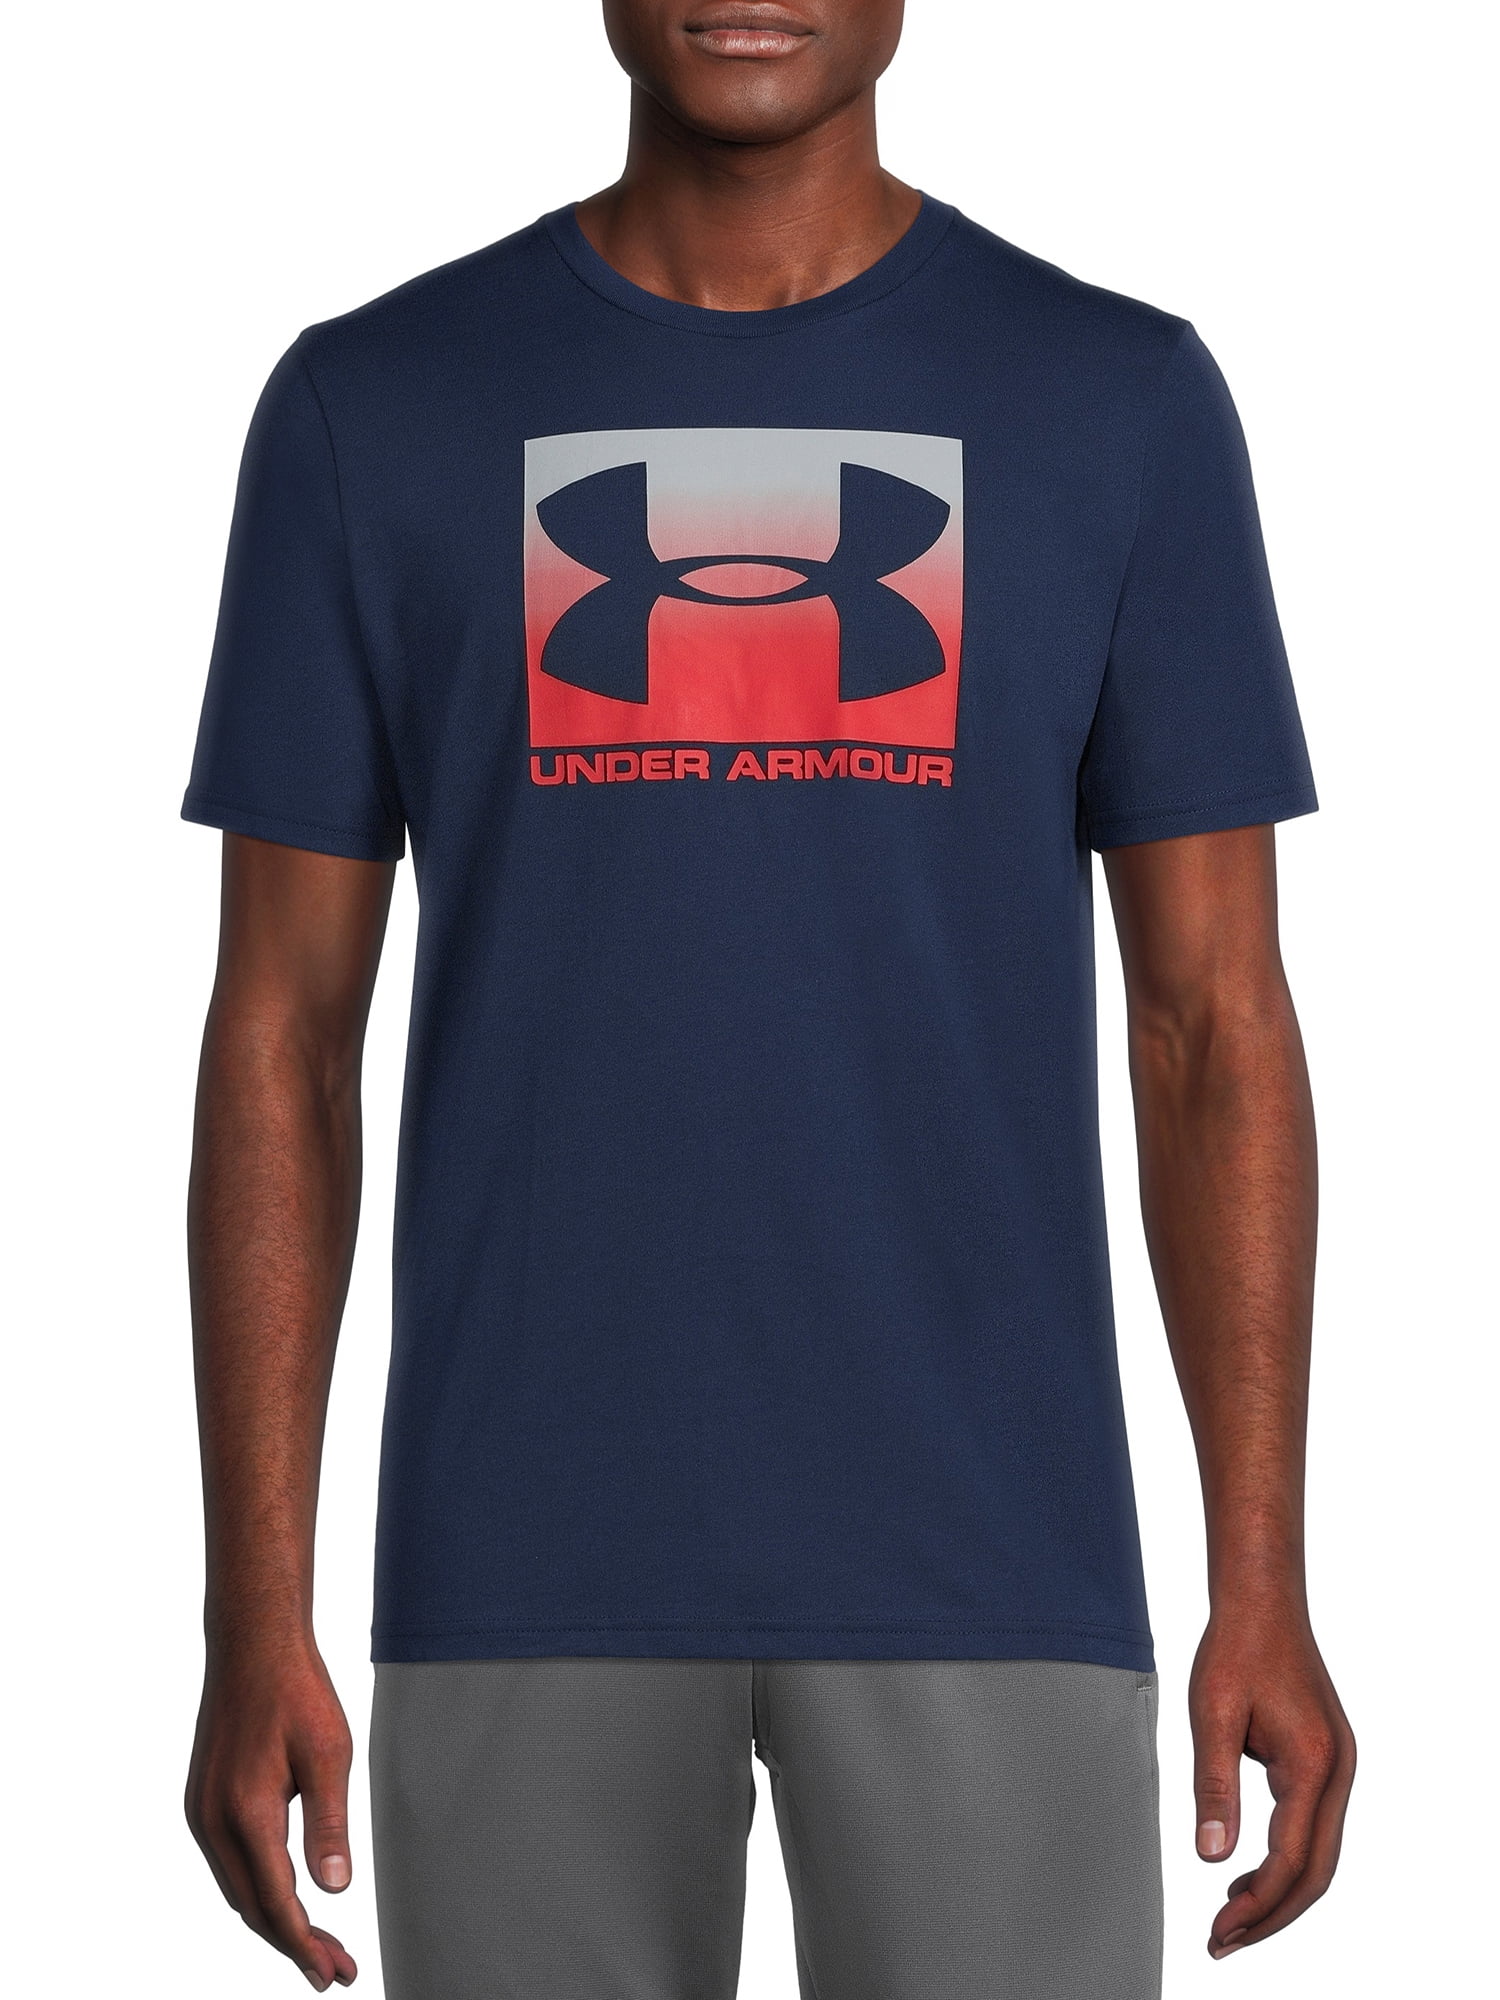 Under Armour Mens Boxed Sportstyle T Shirt Tee Top Navy Blue Red Sports Gym 